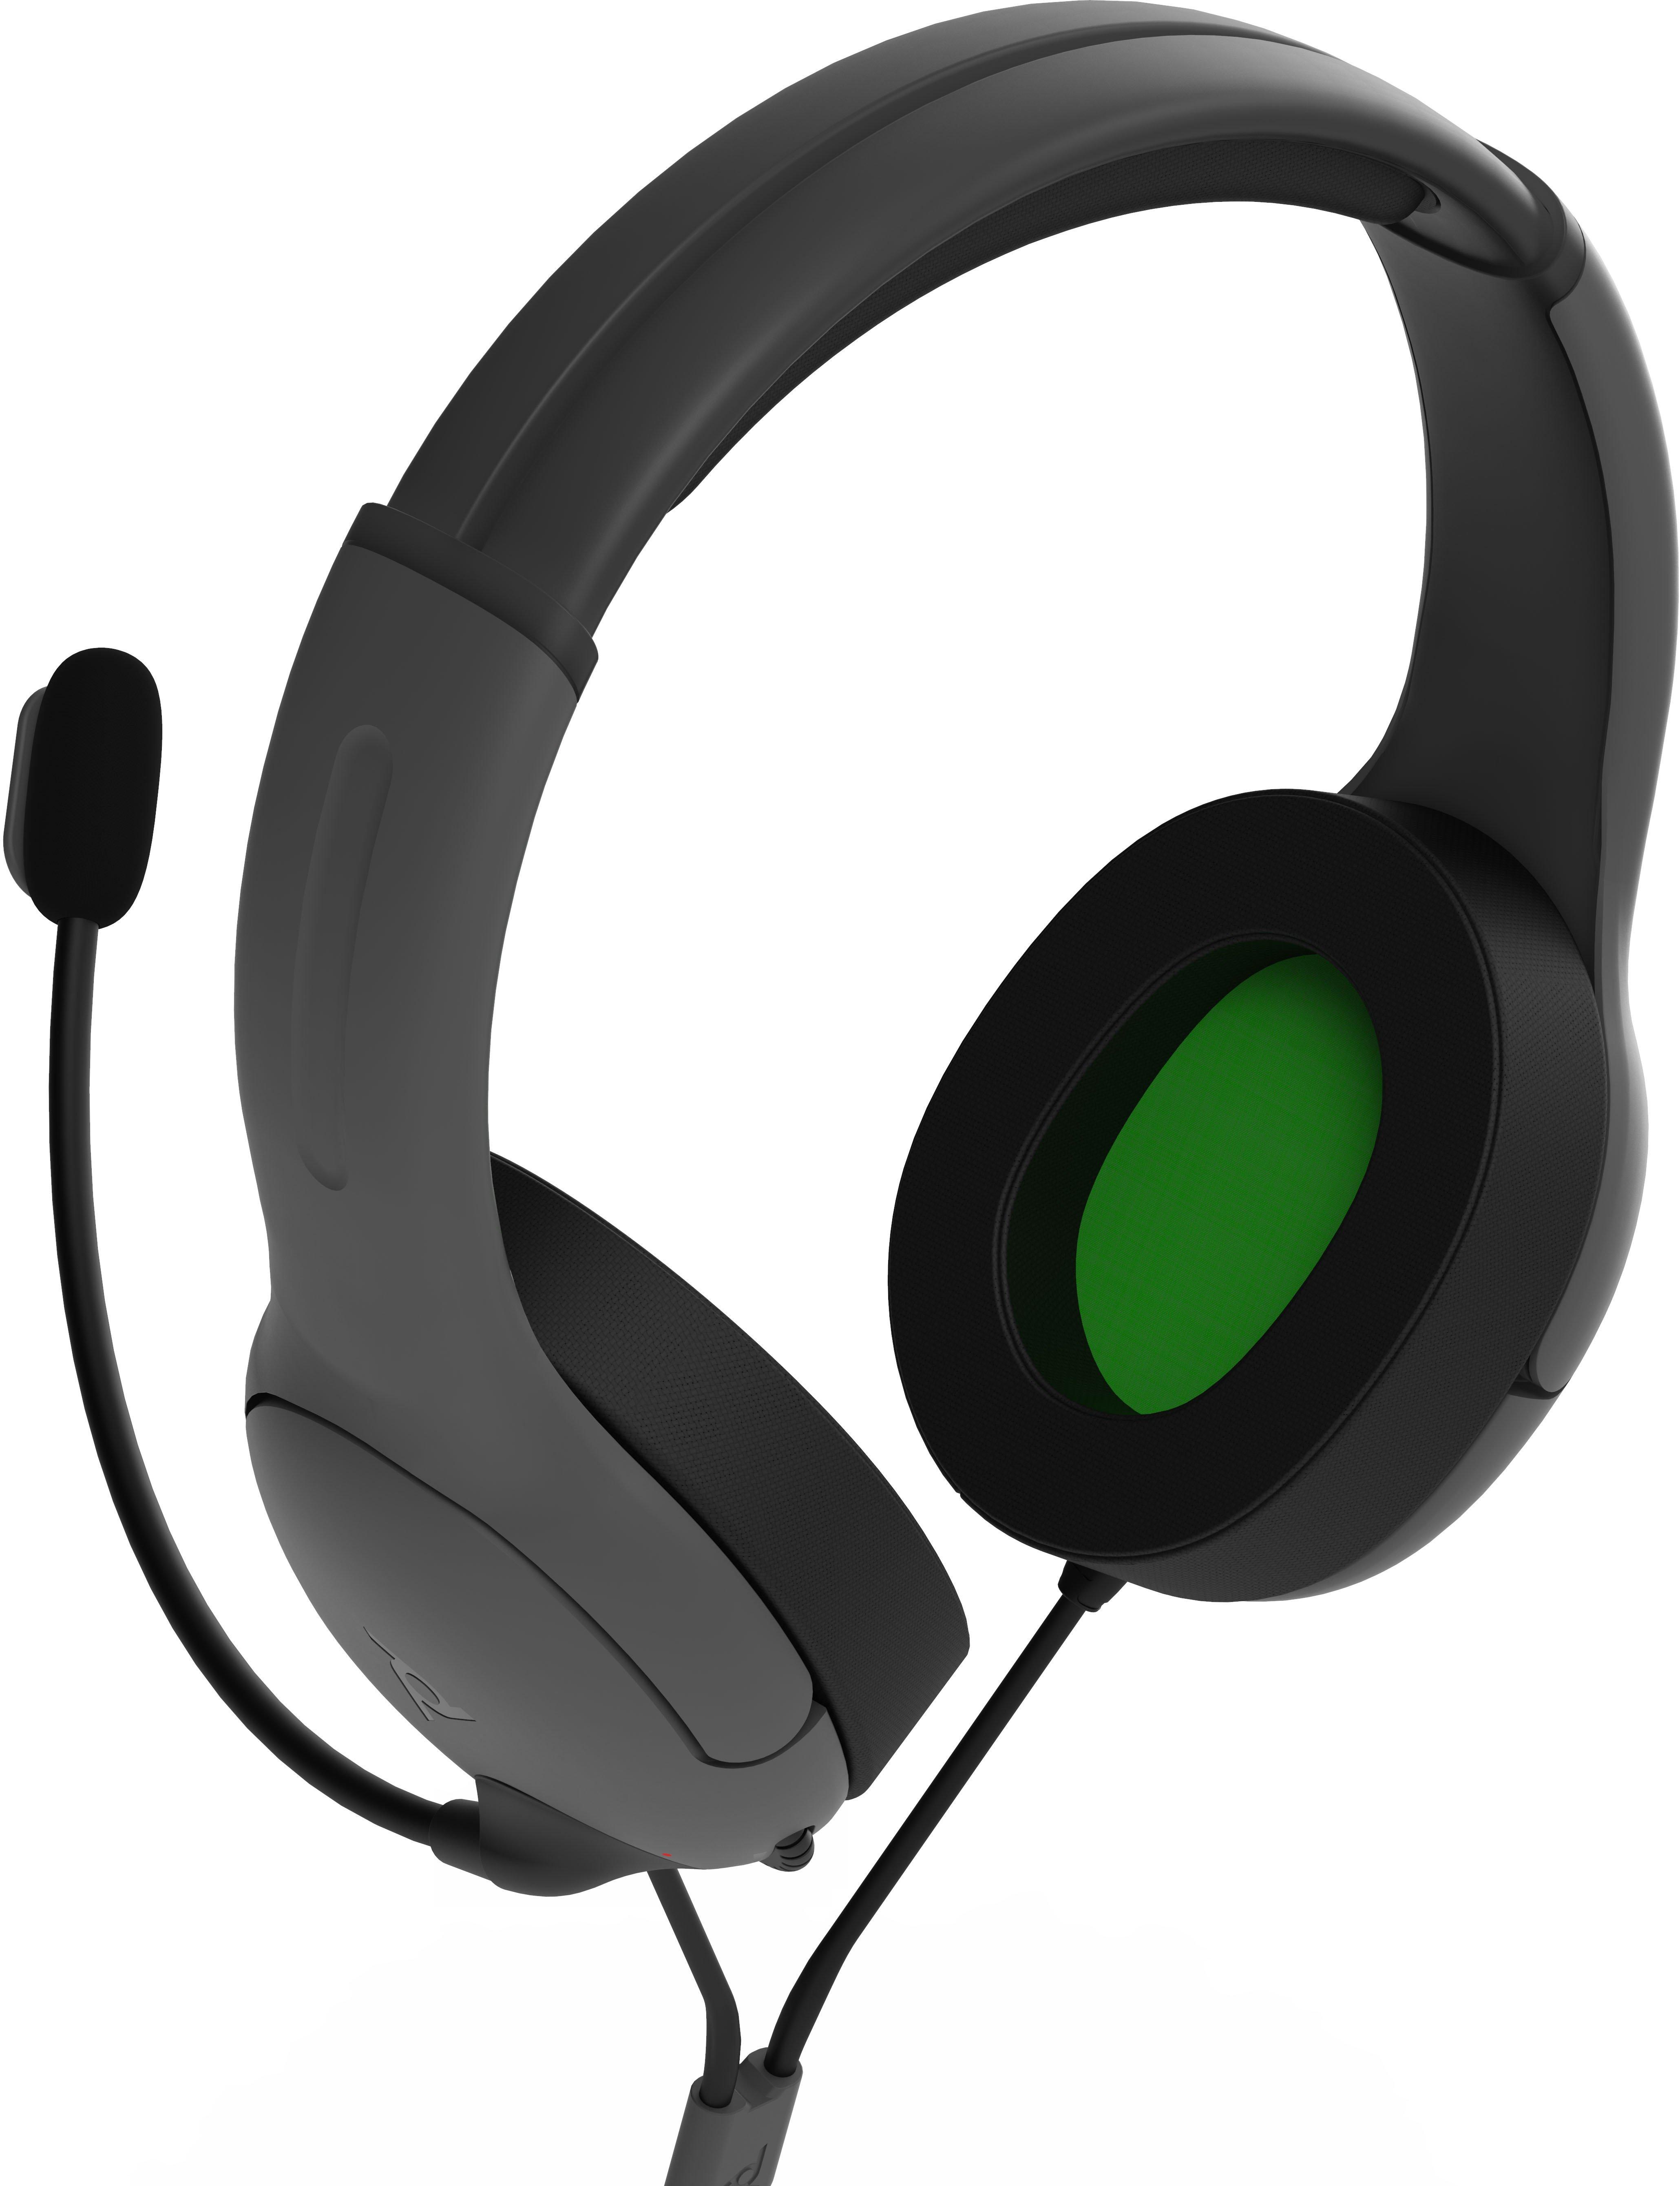 lvl 40 wired headset xbox one